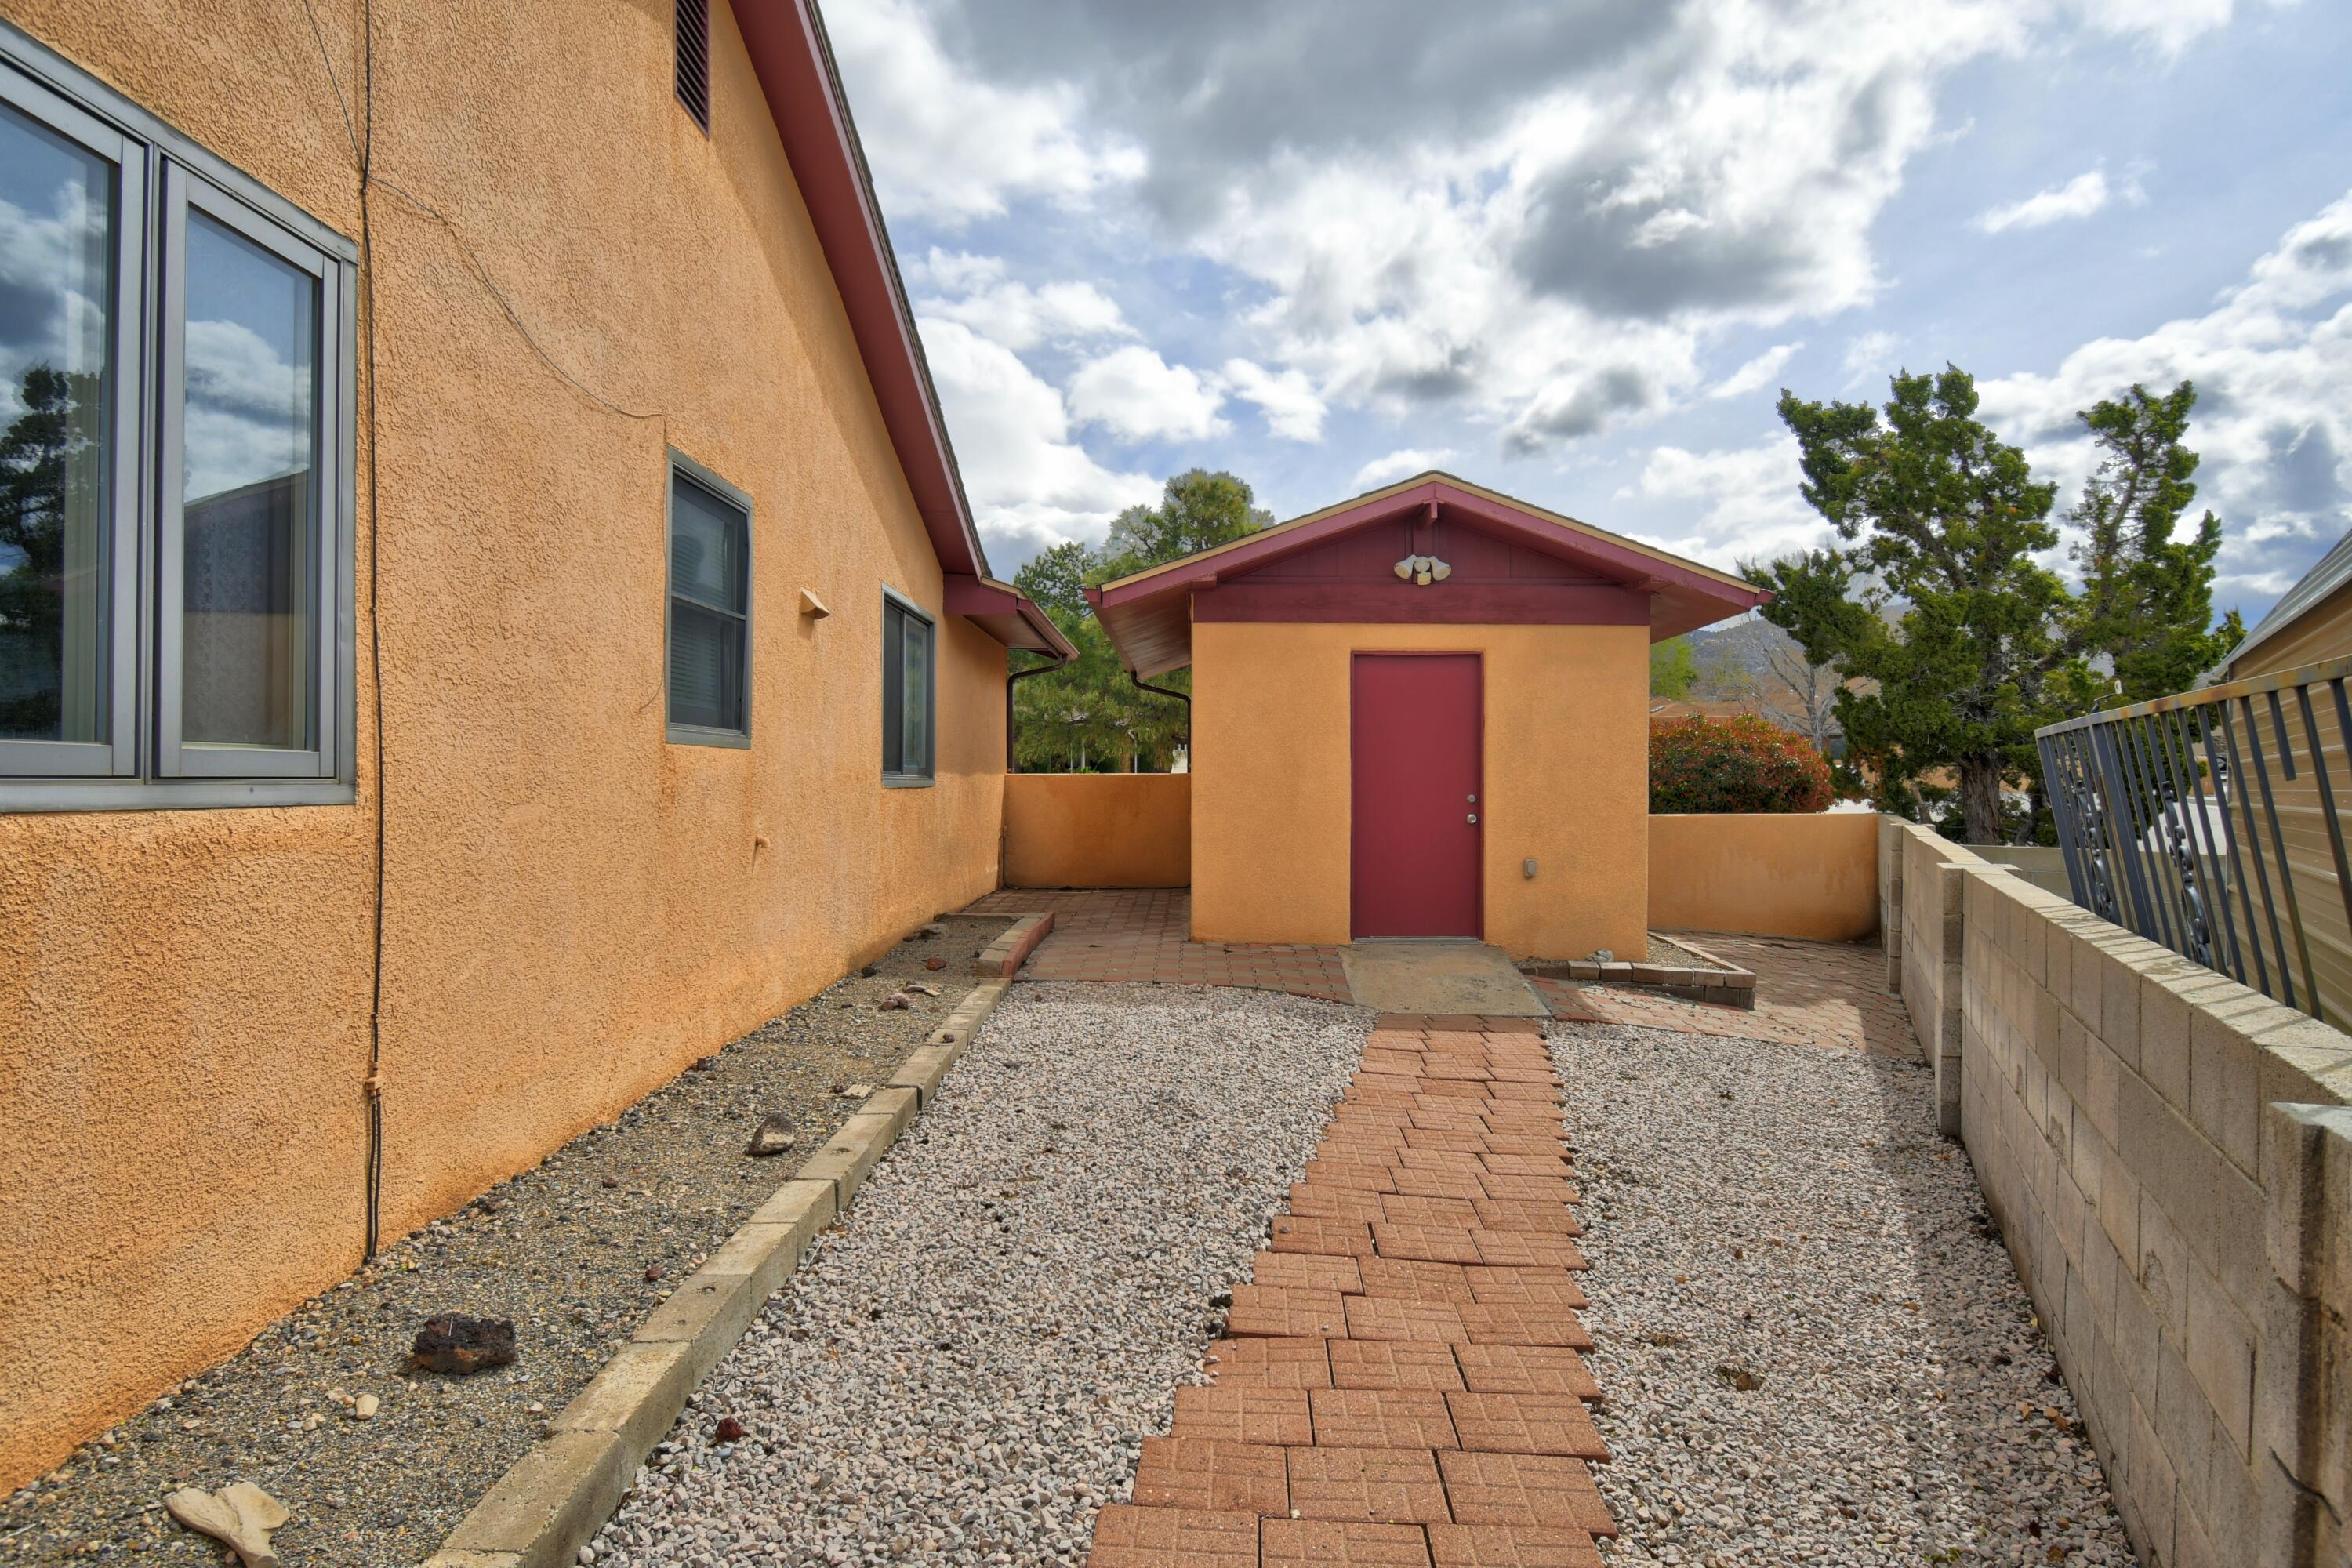 12525 Iroquois Place NE, Albuquerque, New Mexico 87112, 4 Bedrooms Bedrooms, ,2 BathroomsBathrooms,Residential,For Sale,12525 Iroquois Place NE,1059661